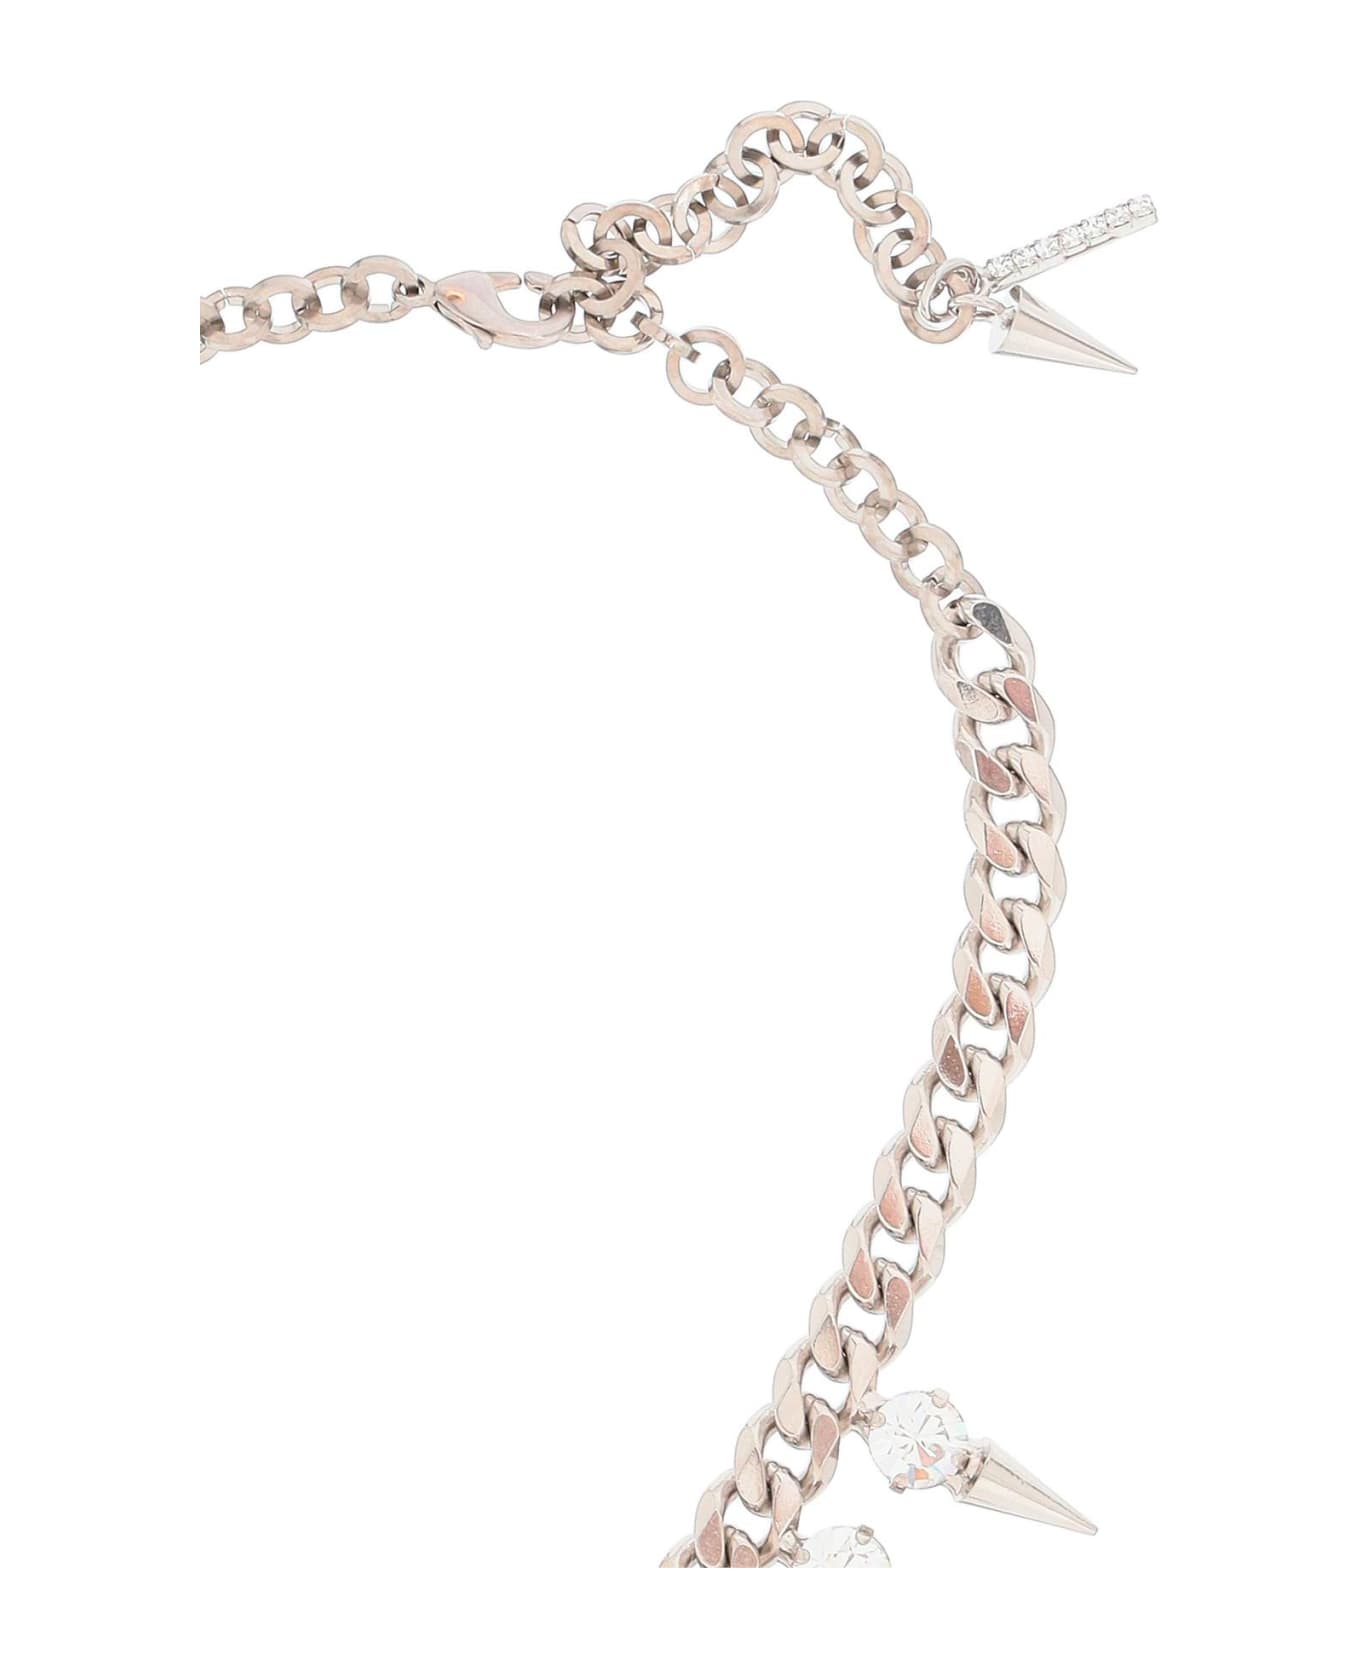 Alessandra Rich Choker With Crystals And Spikes - CRYSTAL SILVER (Silver) ネックレス